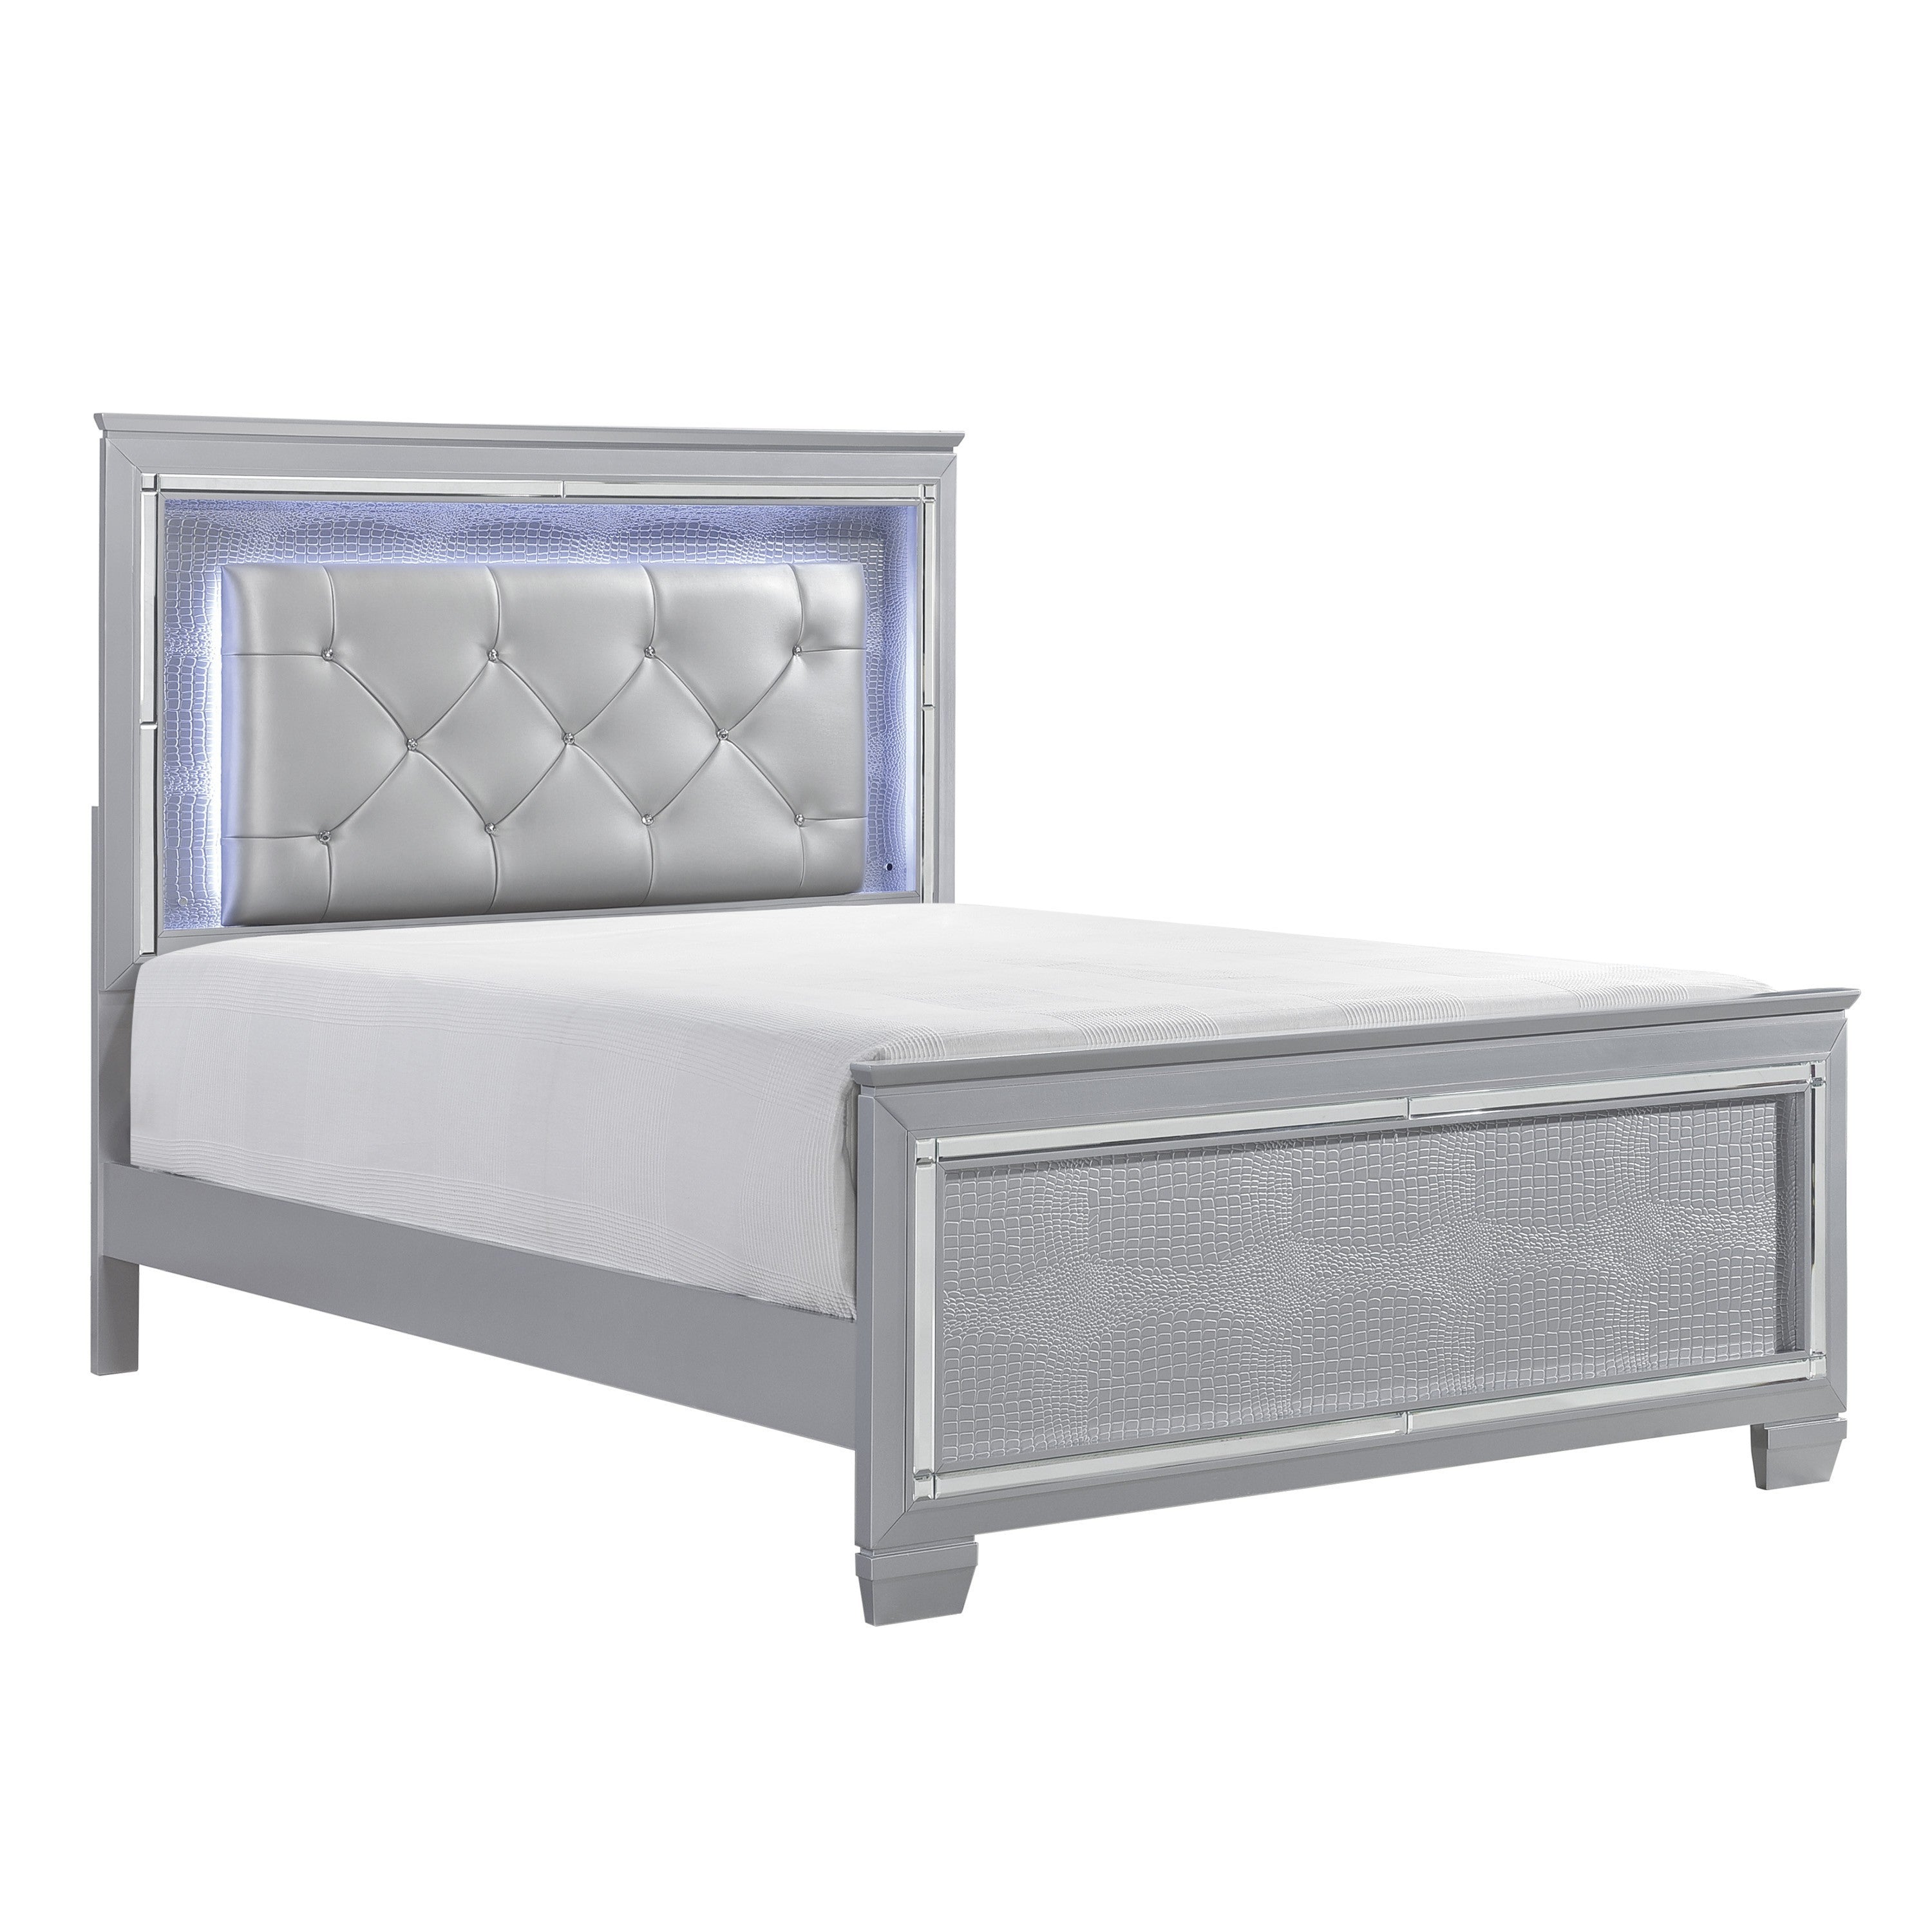 Upholstered Queen Size Bed LED Headboard (Silver)